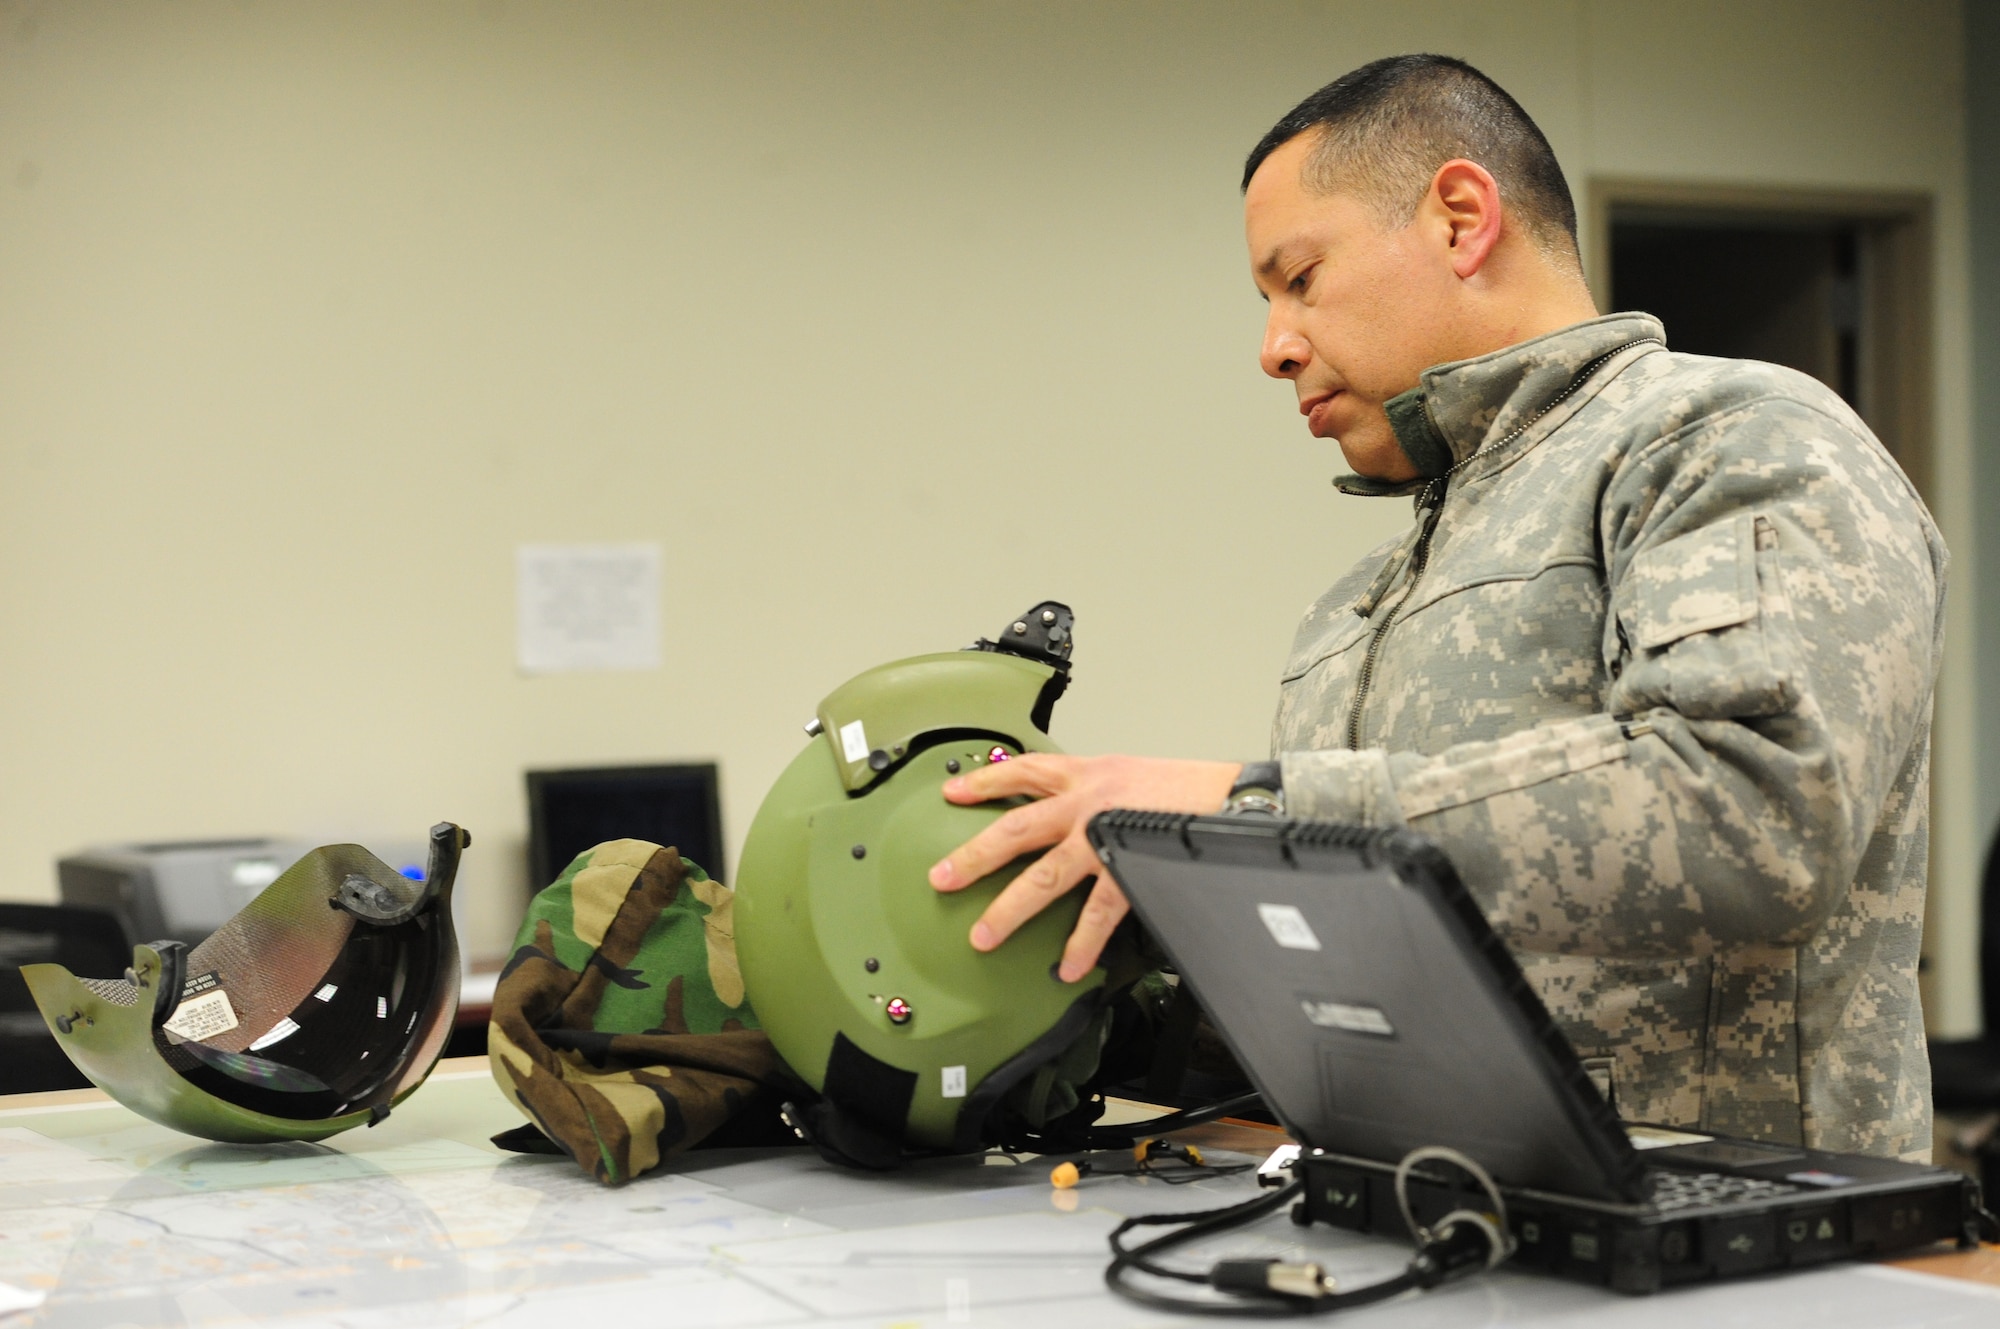 WHITEMAN AIR FORCE BASE, Mo. -- U.S. Army Chief Warrant Officer 4 Jim Nix, 1 -135th Attack Reconnaissance Battalion standardization instructor pilot, re-sizes his helmet for night vision goggle operations, Jan. 16. Pilots perform nighttime operations to prepare for future deployments and to meet training requirements. (U.S. Air Force photo/Staff Sgt. Nick Wilson) (Released)